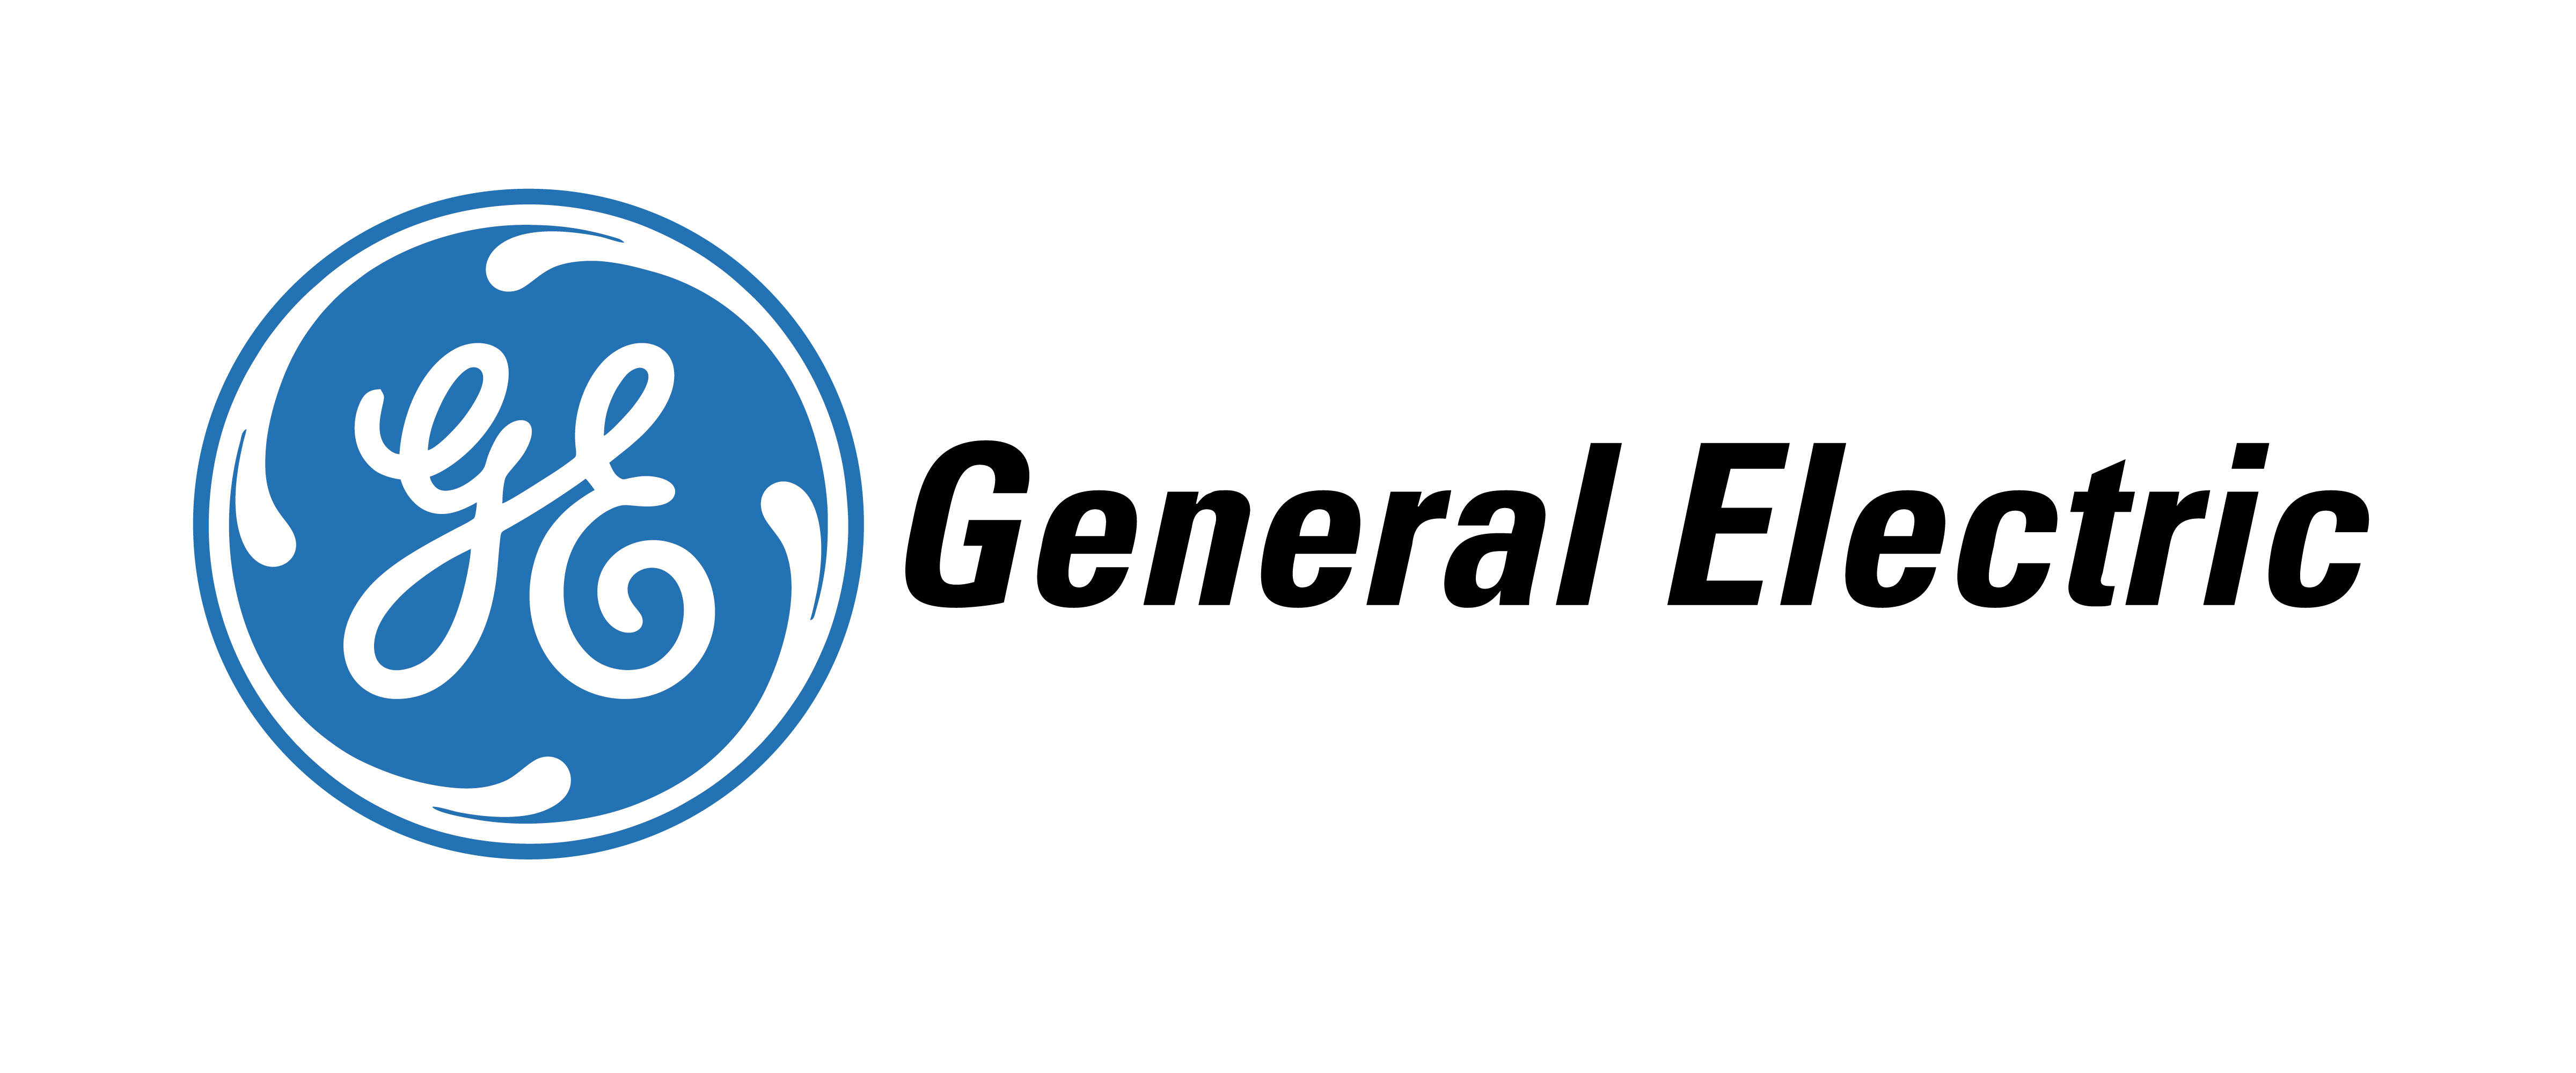 New General Electric Logo - General Electric